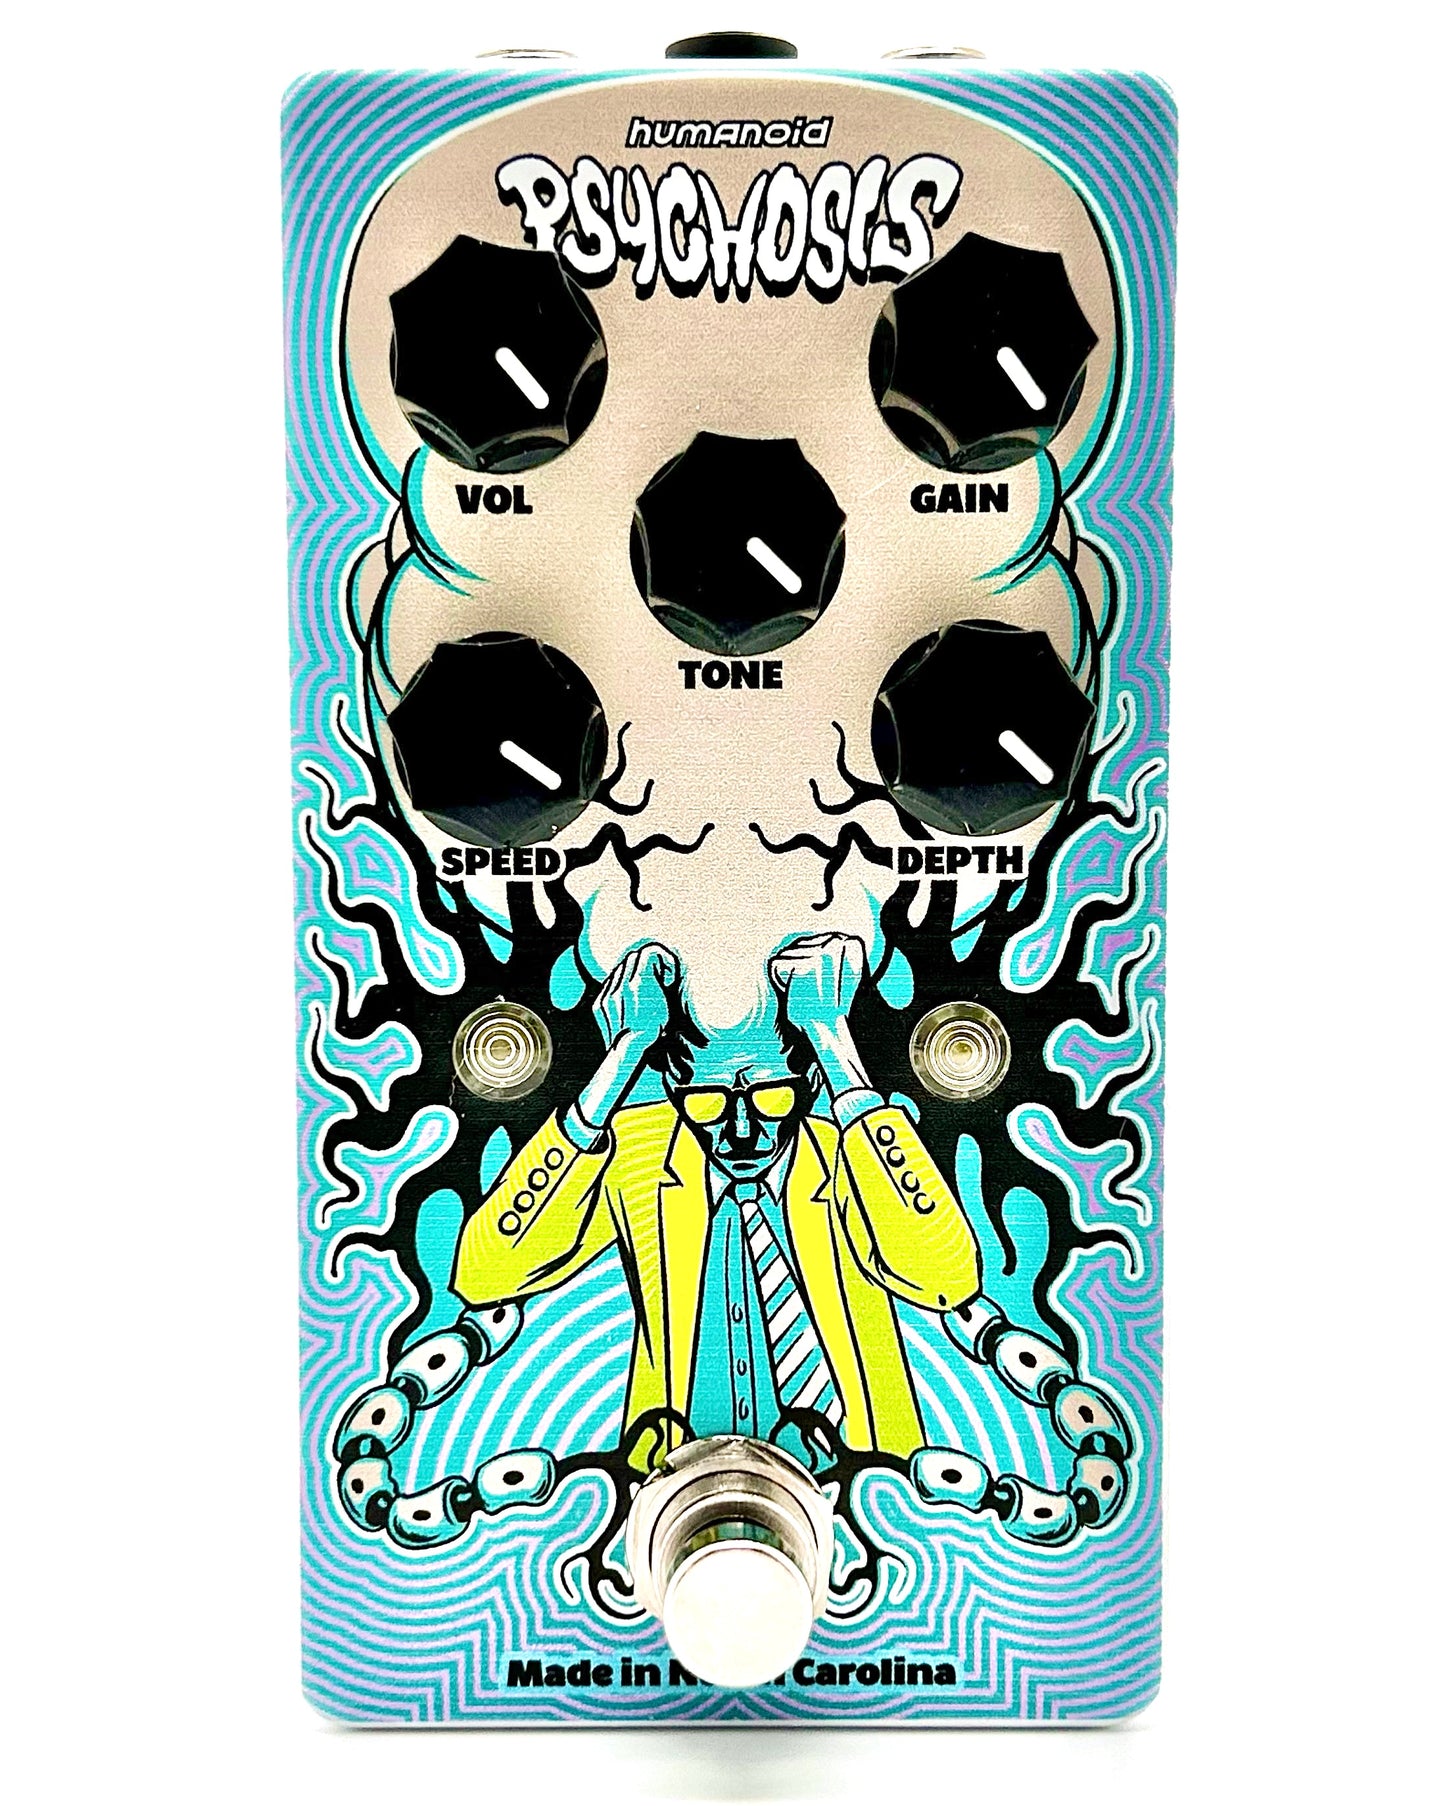 Humanoid Psychosis - Tweed Voiced Overdrive with Tremolo